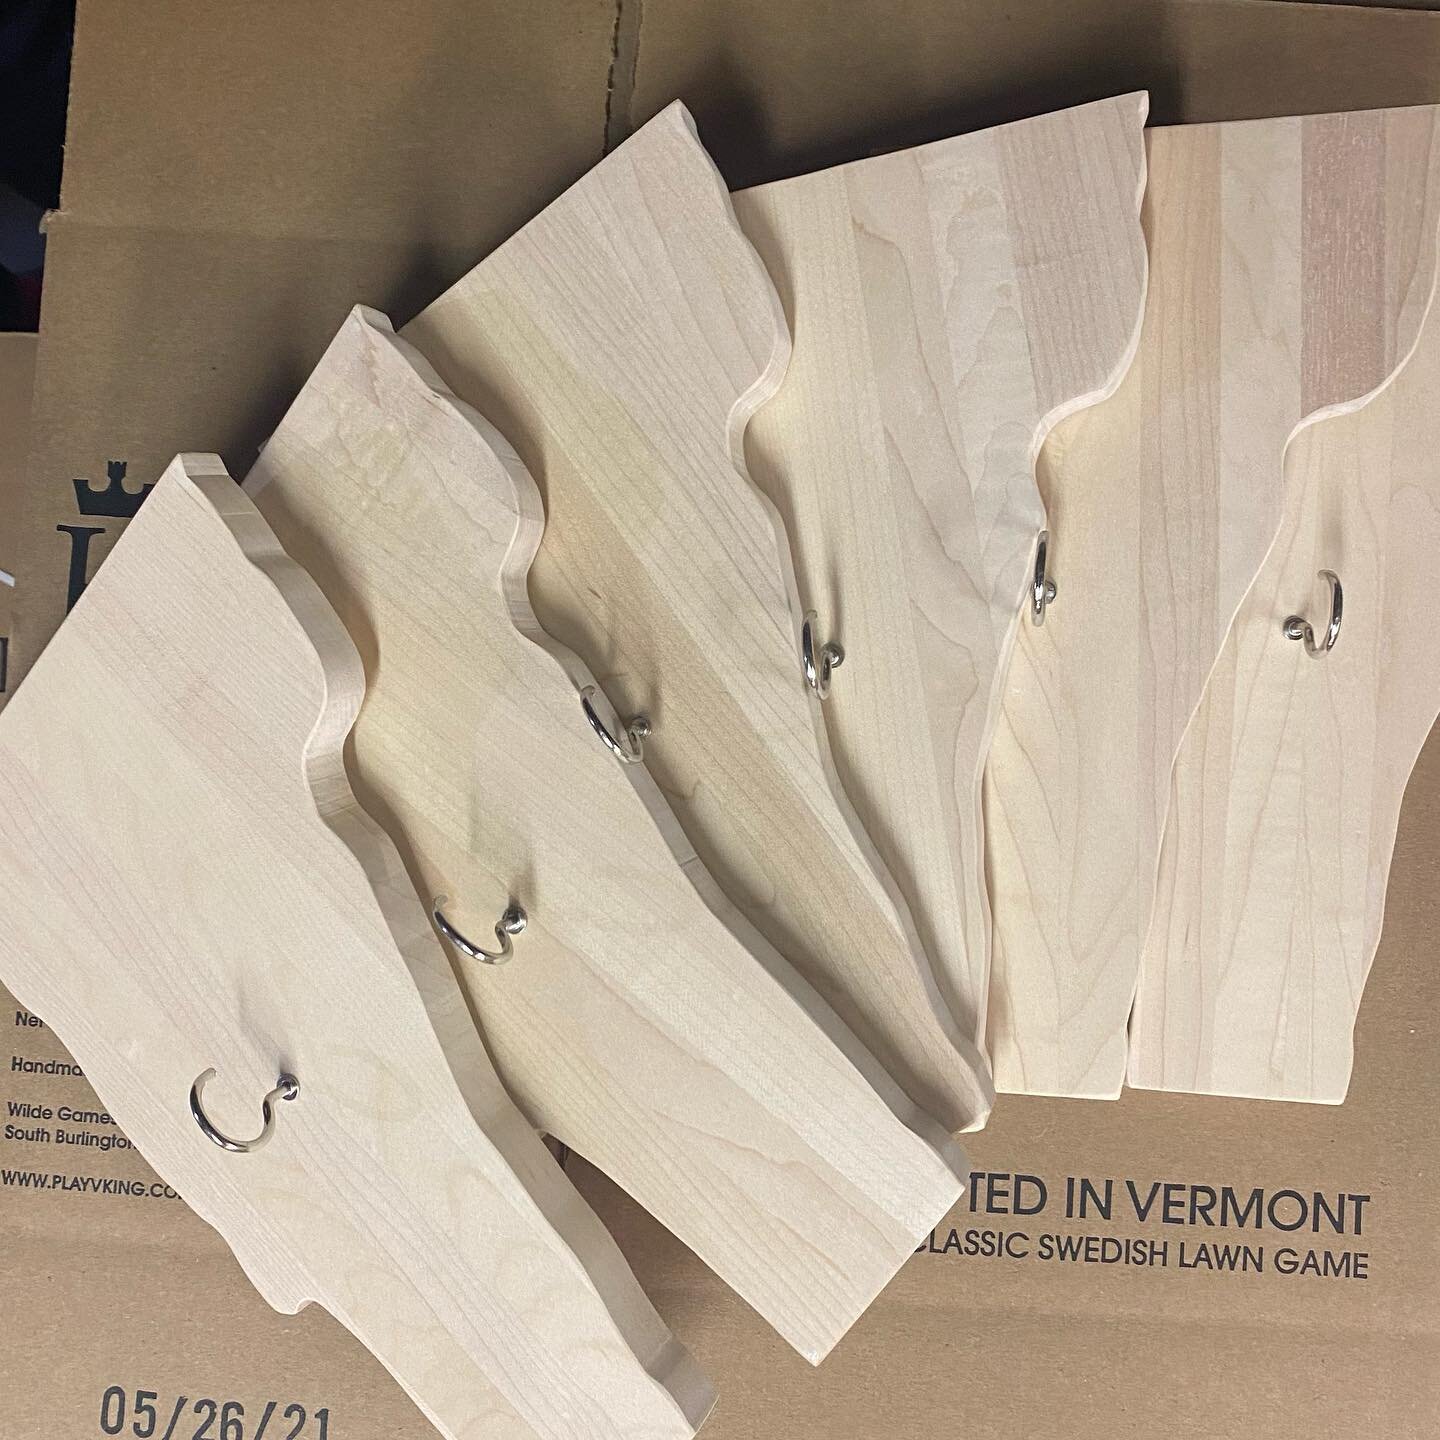 The elves have been hard at work. Vermont Swing a Rings are going fast. Shop early, shop local.